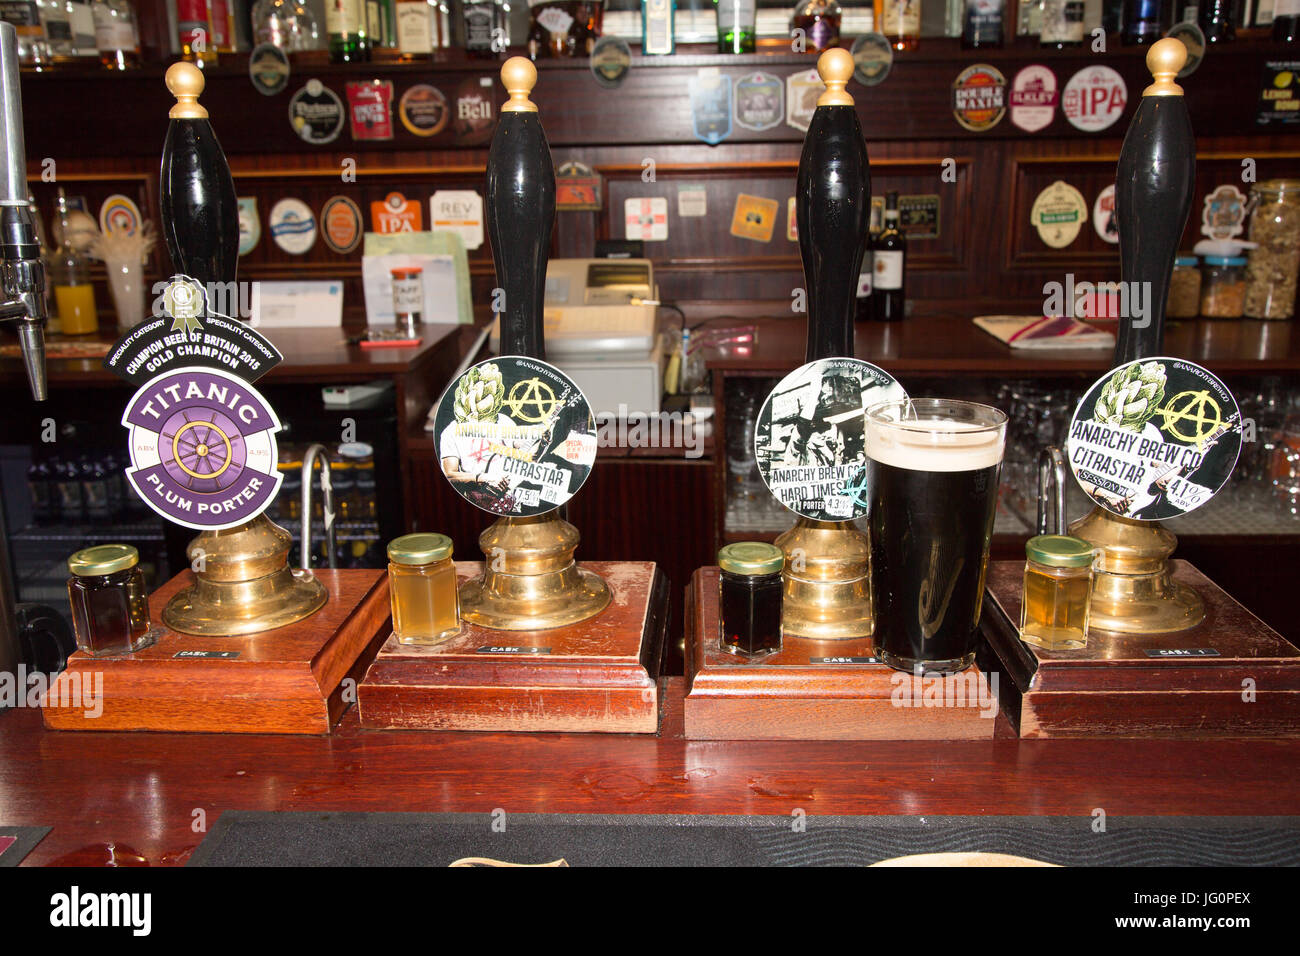 Real ale hand pumps Stock Photo